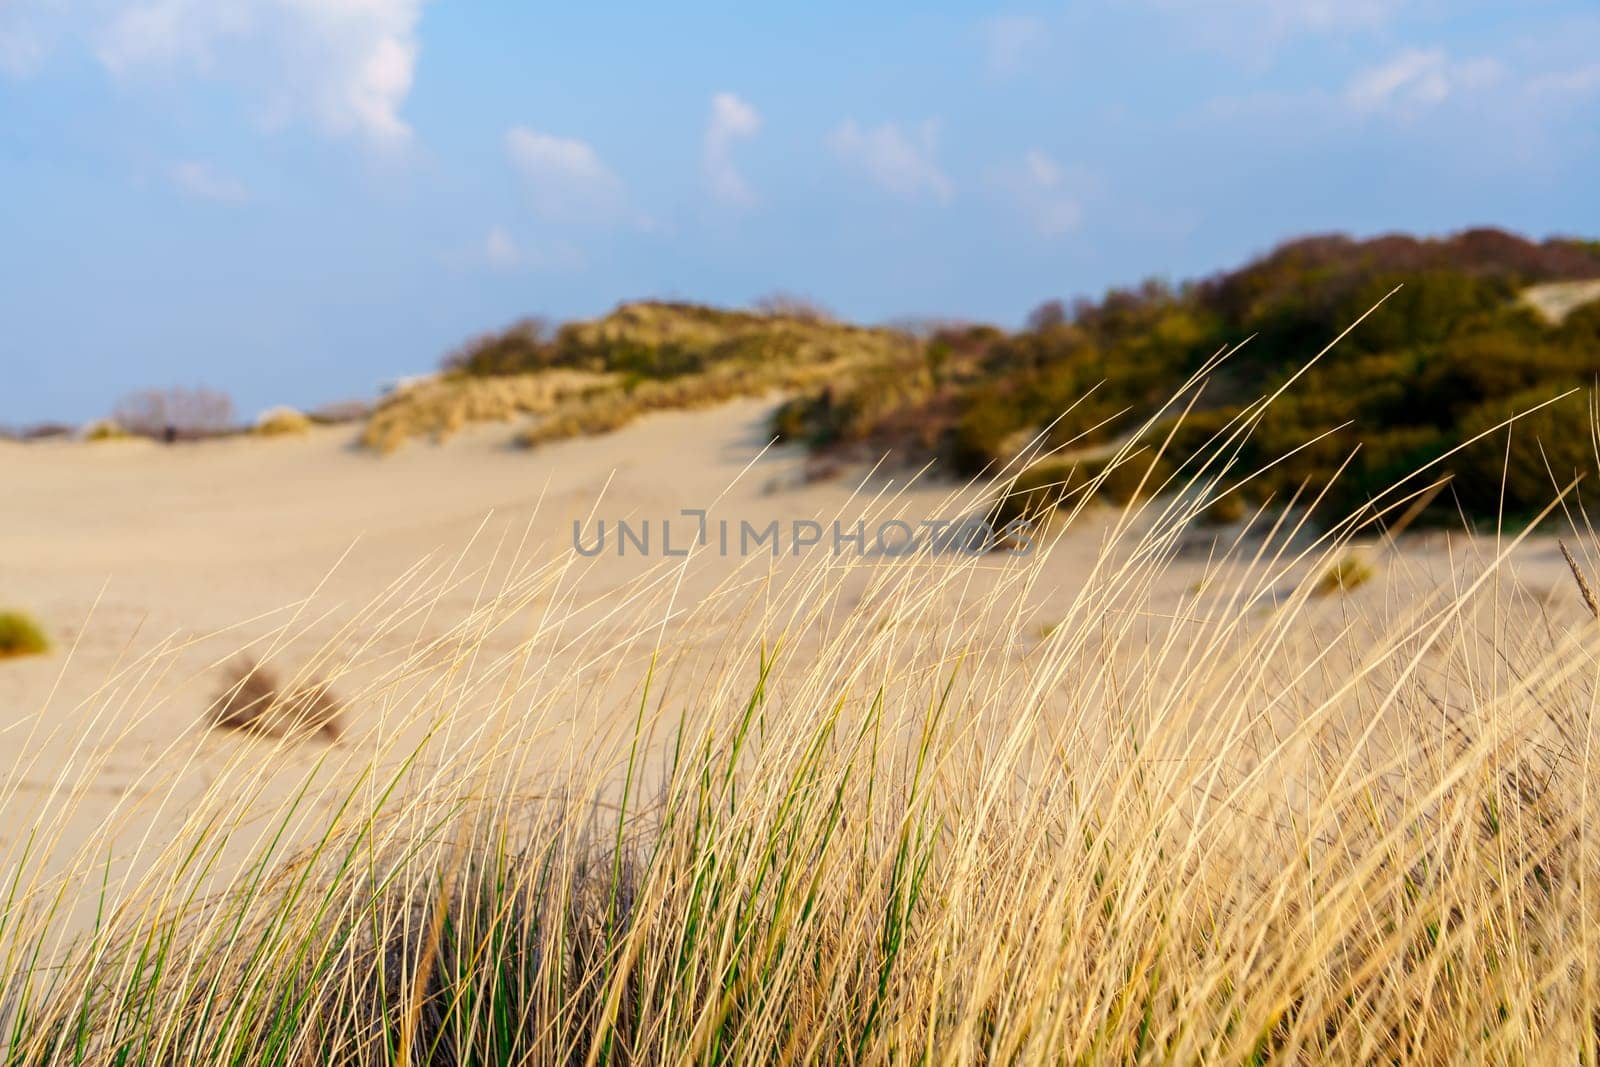 Sunny Day on Sandy Dunes in The Hague, Netherlands: Amazing Sand Dunes of Europe by PhotoTime